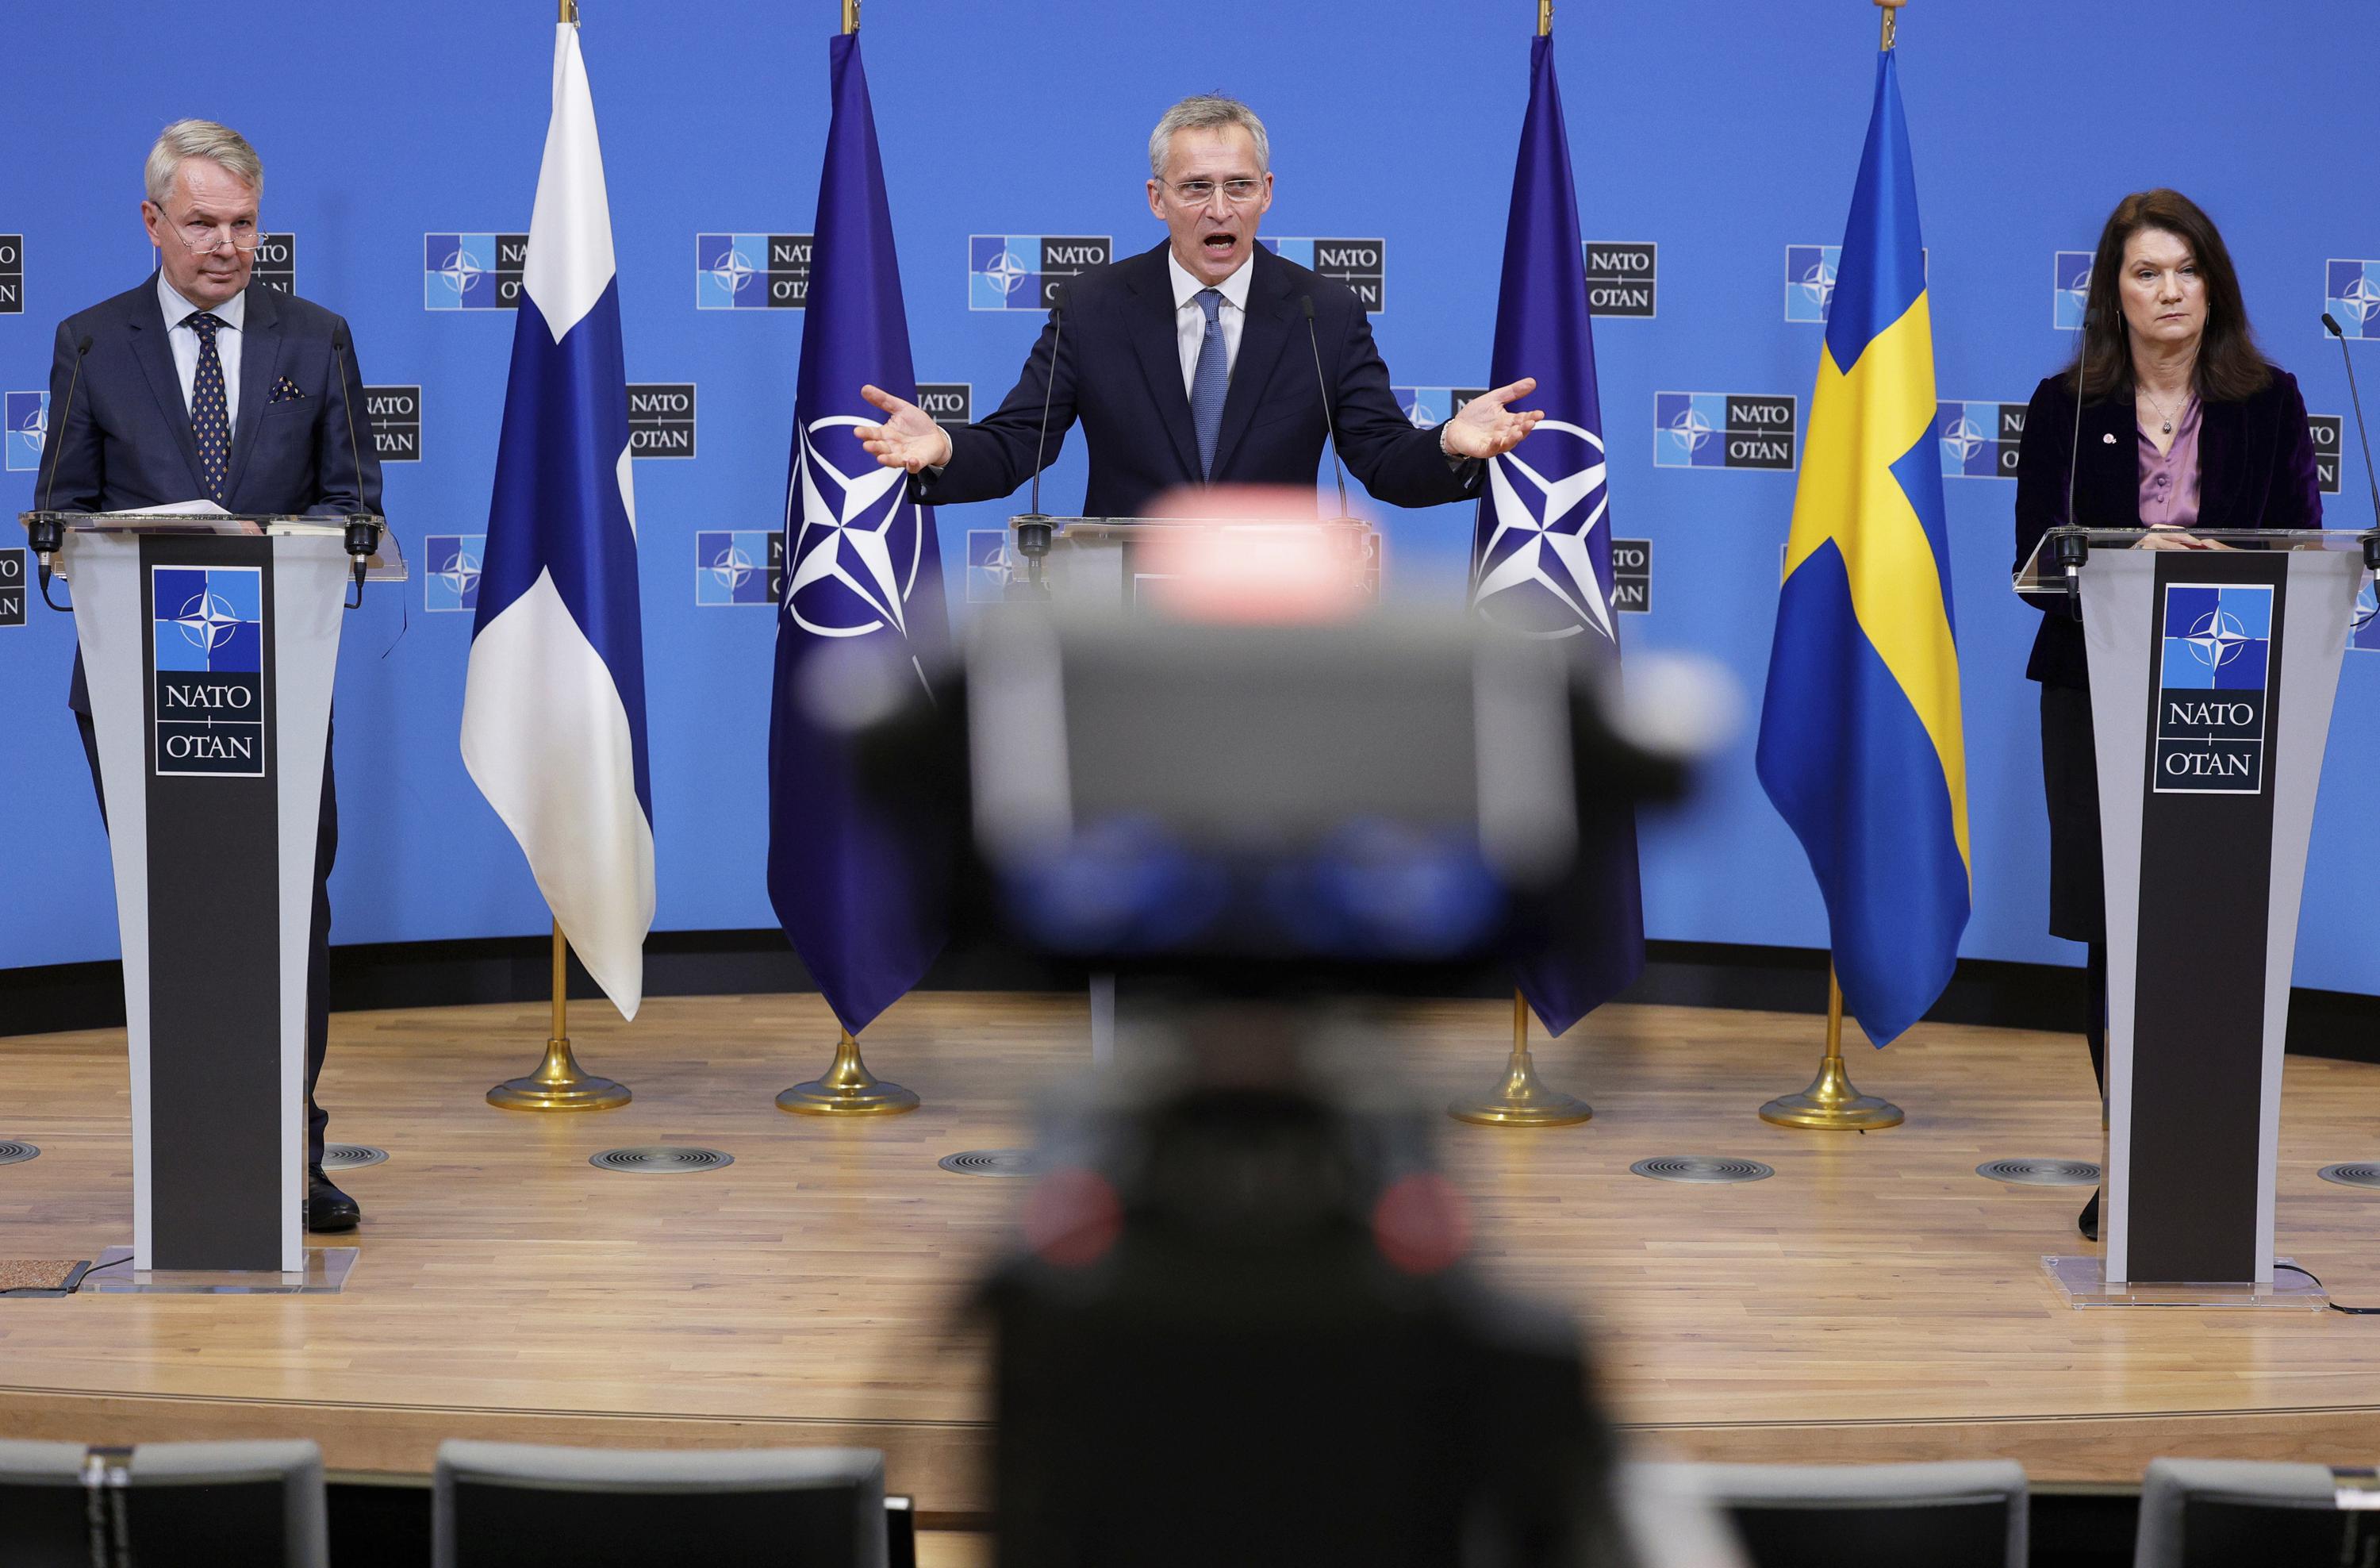 Delegations from Sweden, Finland hold NATO talks in Turkey - The Associated Press